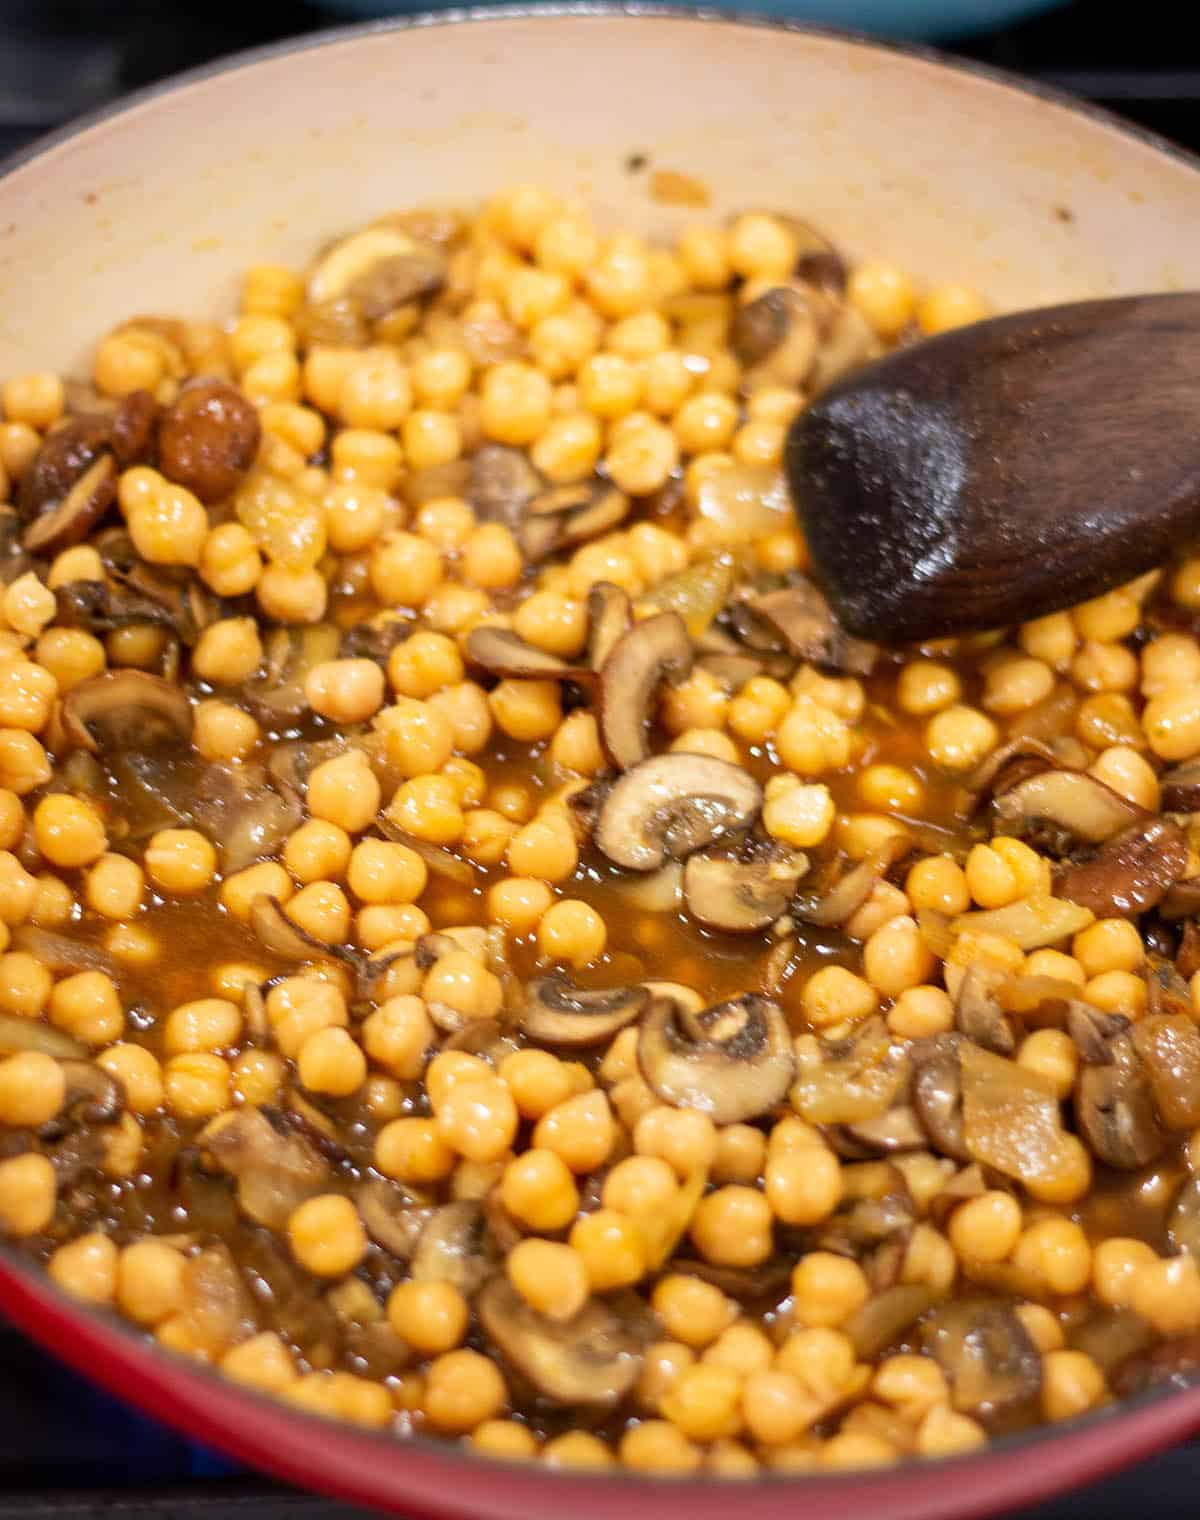 Braiser with chickpeas and mushrooms. 